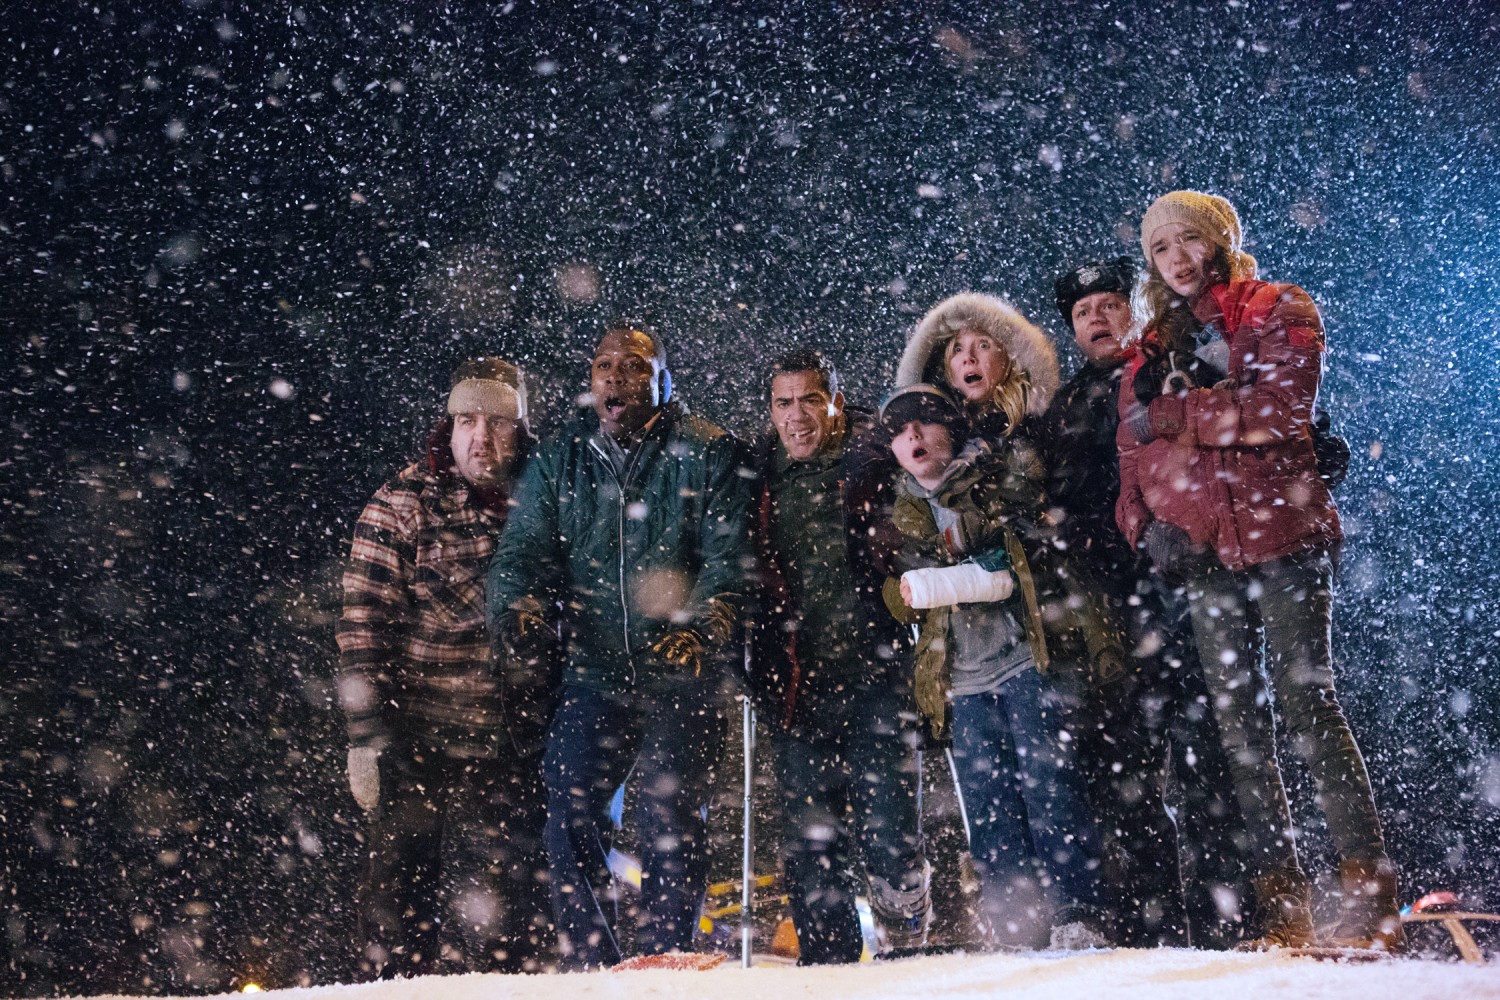 Griffin Kane with Anne Heche, Alissa Skovbye, Kevin Daniels and Carlos Gomez on the set of One Christmas Eve, 2014.